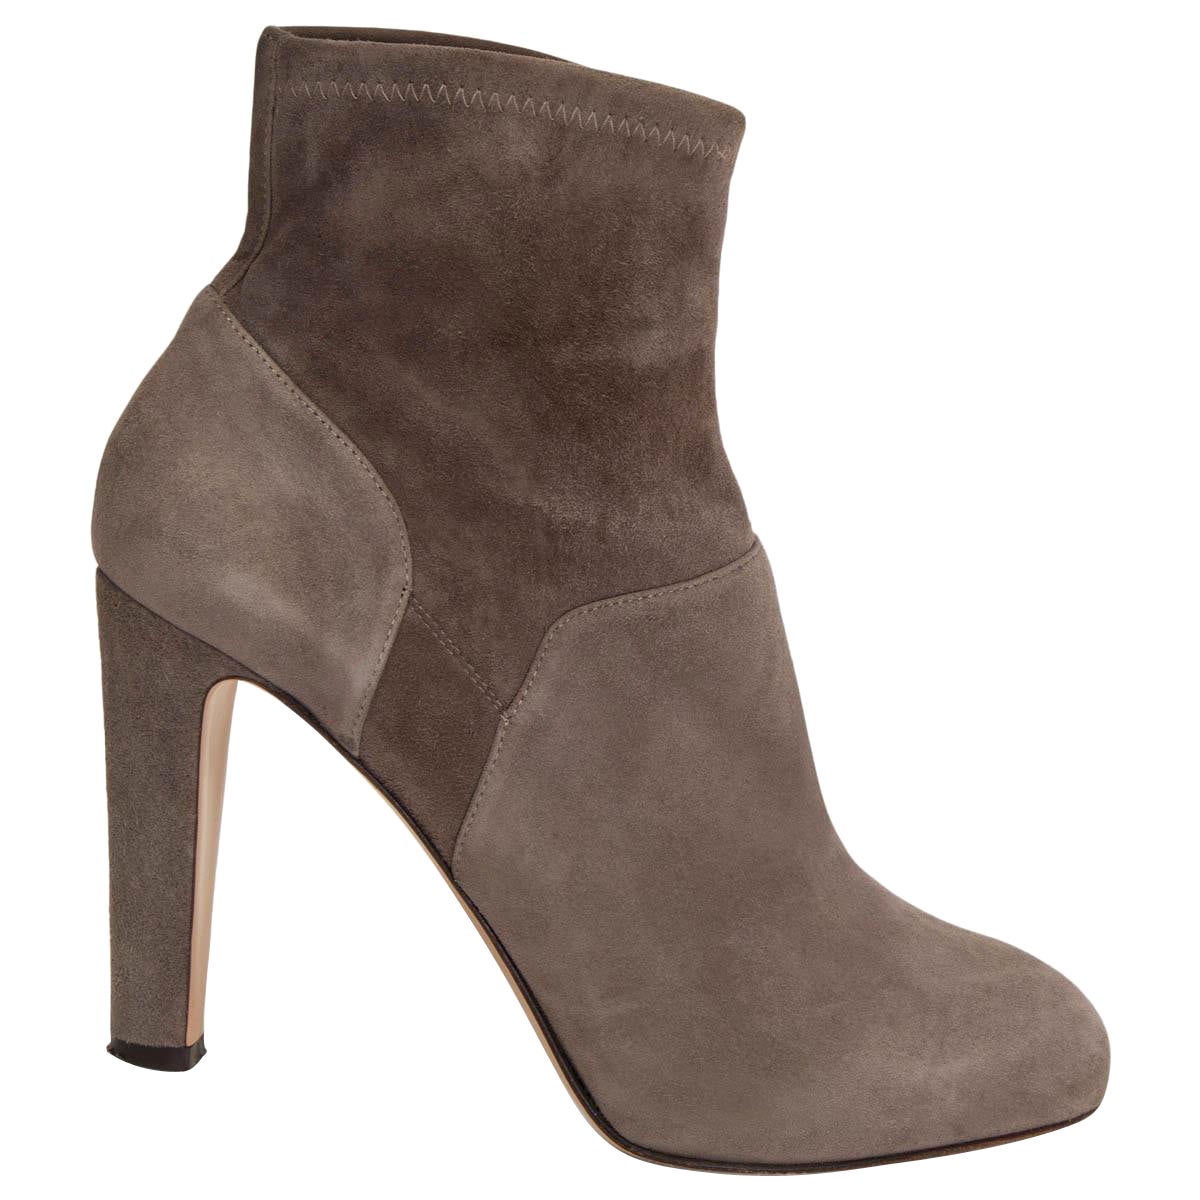 GIANVITO ROSSI light grey STRETCH SUEDE ANKLE Boots Shoes 37.5 For Sale